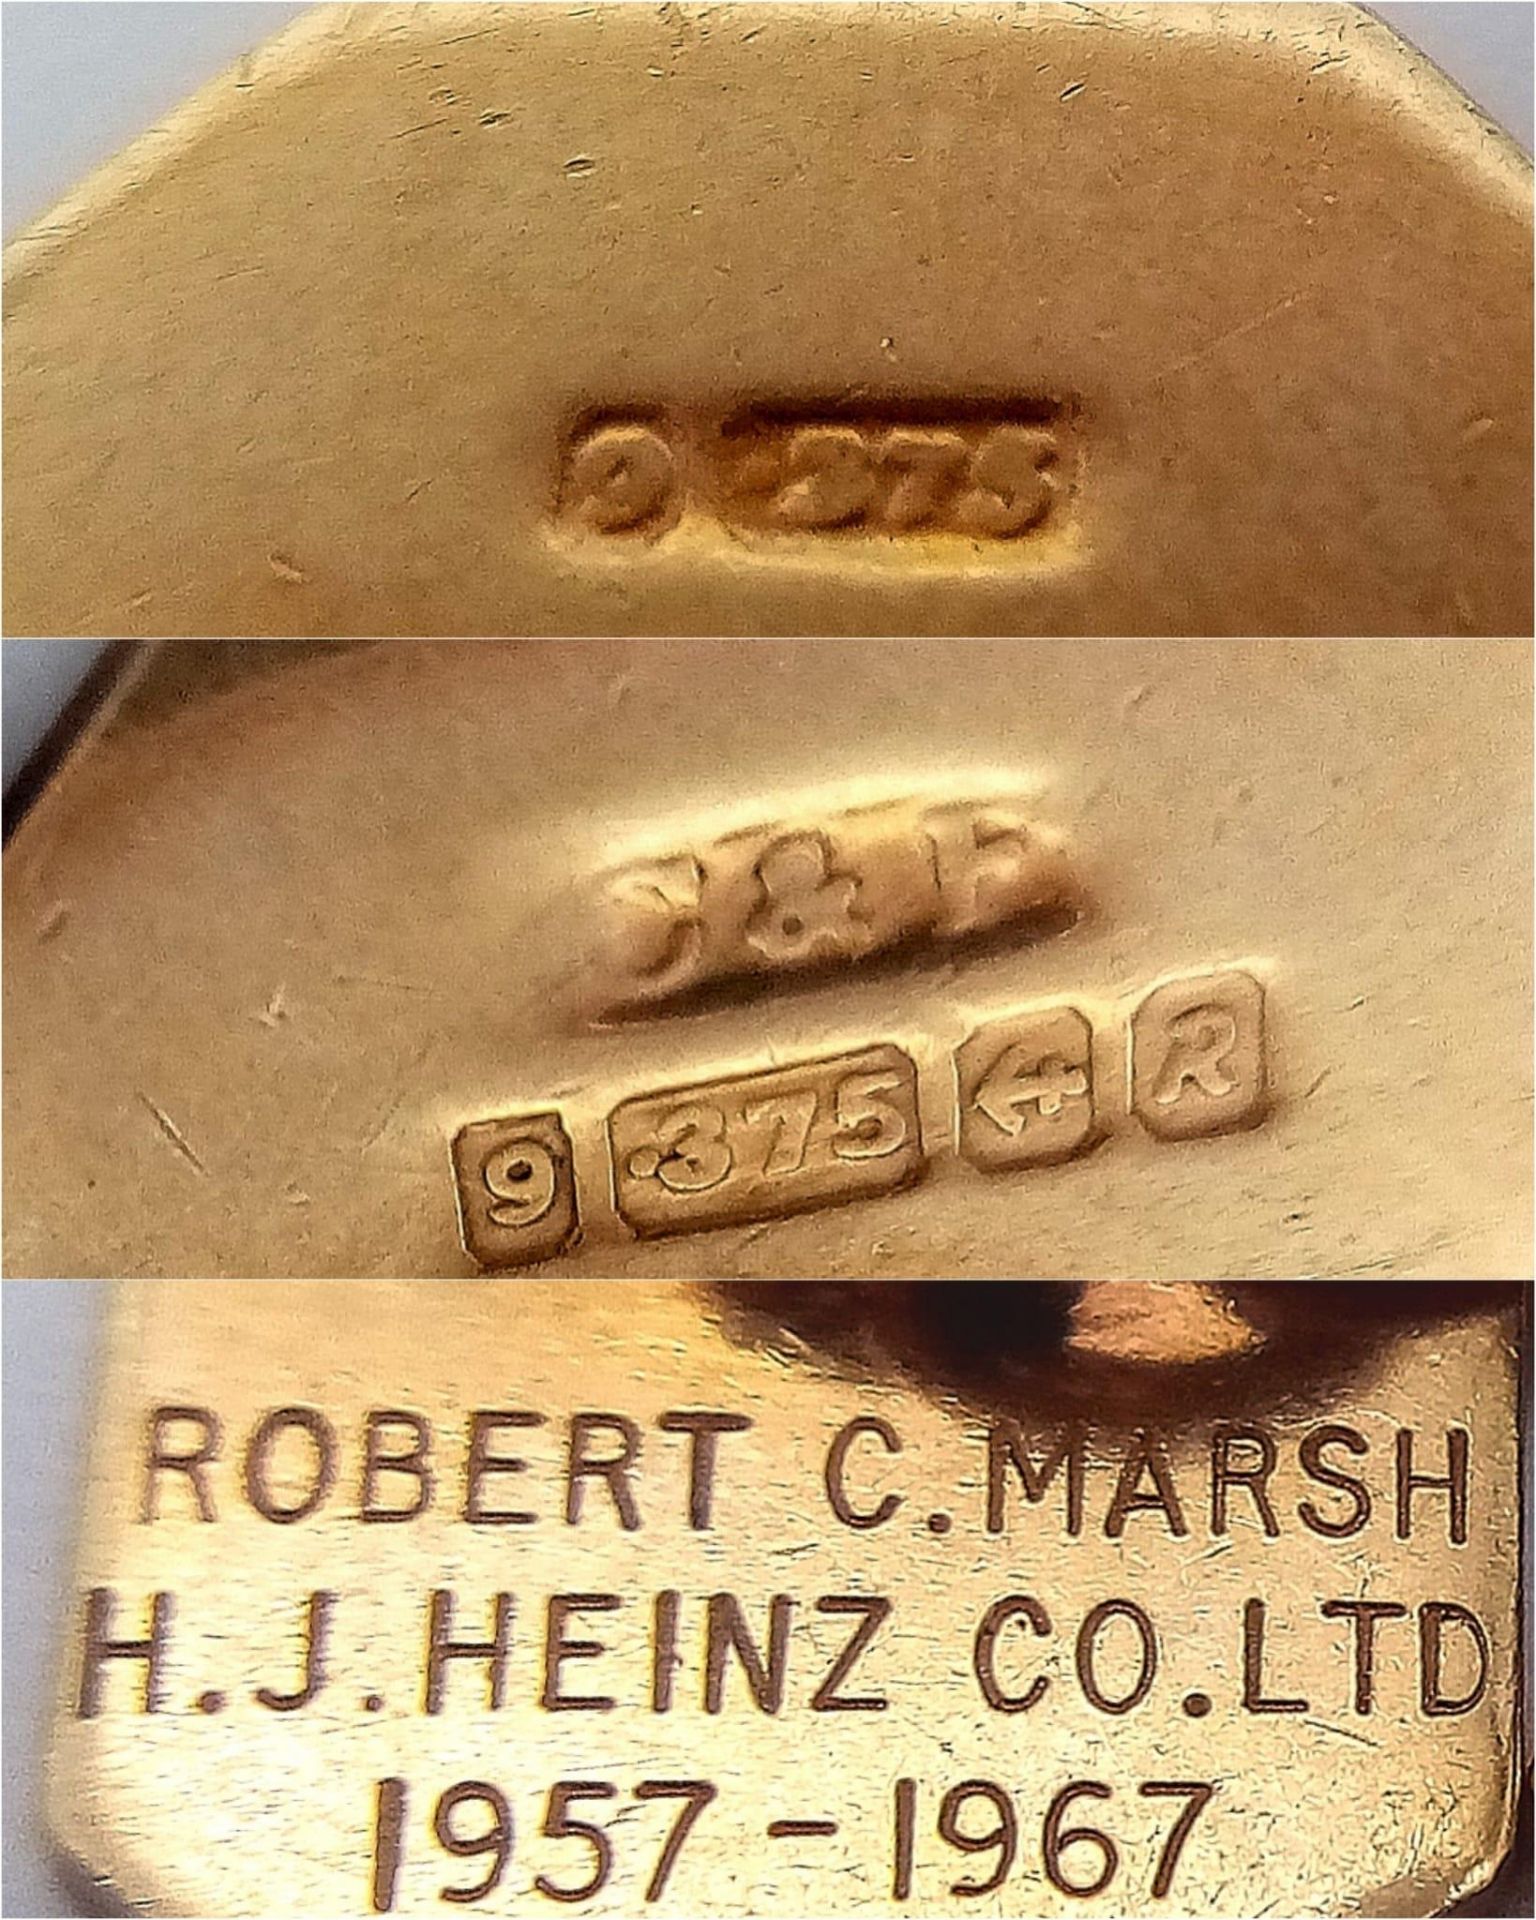 A VINTAGE PAIR OF CHAIN LINK CUFFLINKS WITH THE INITIALS "R.C.M." AND PRESENTED BY THE HEINZ COMPANY - Image 4 of 4